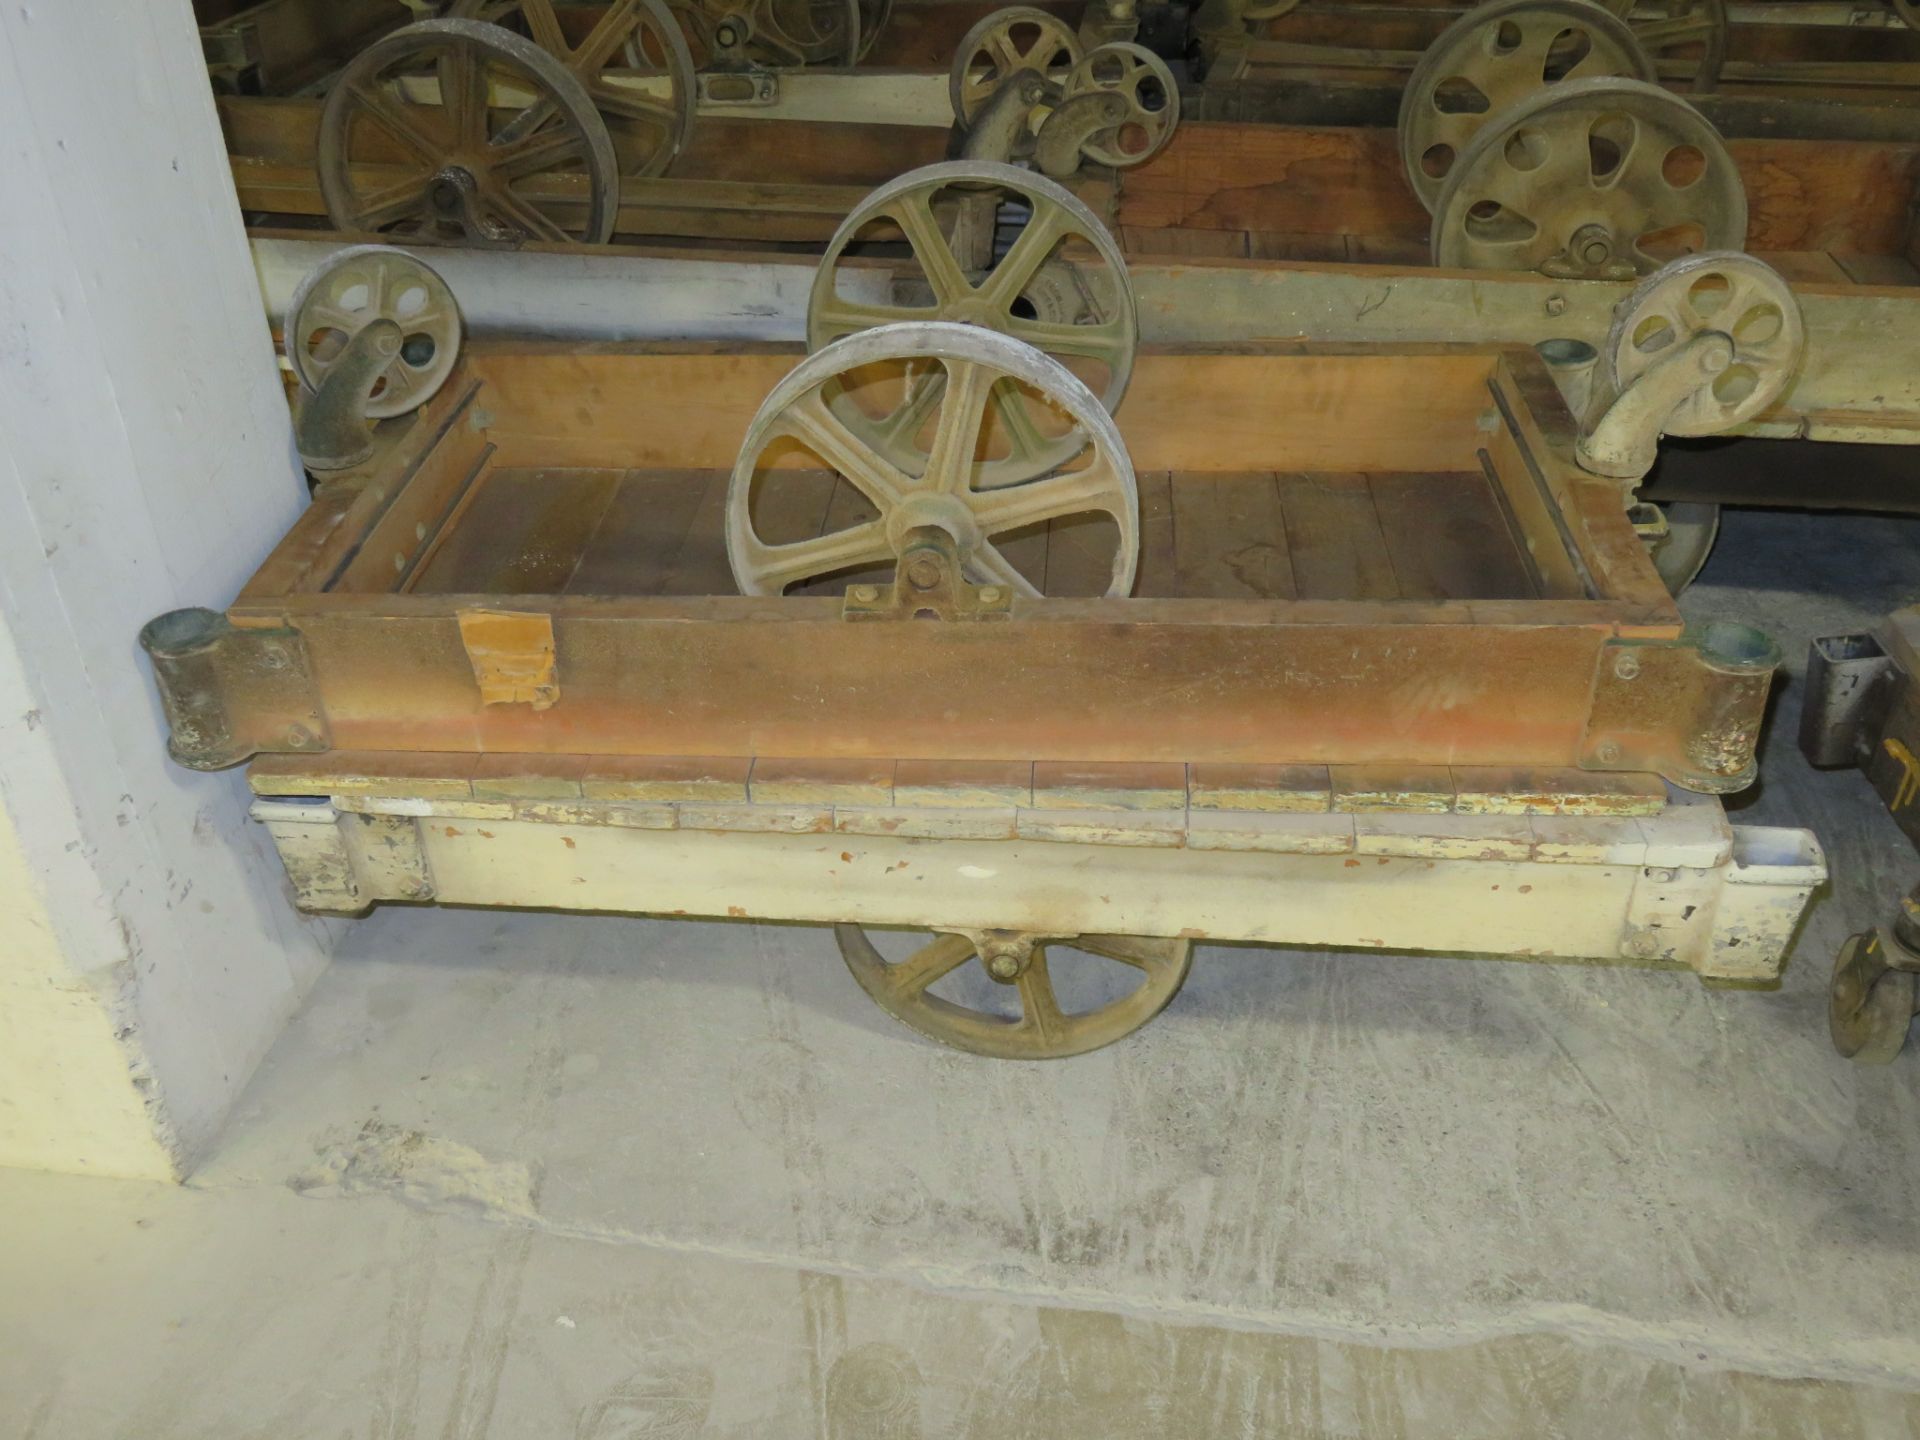 Lot of 2 Railroad Carts approx 48" x 27" - Image 6 of 11